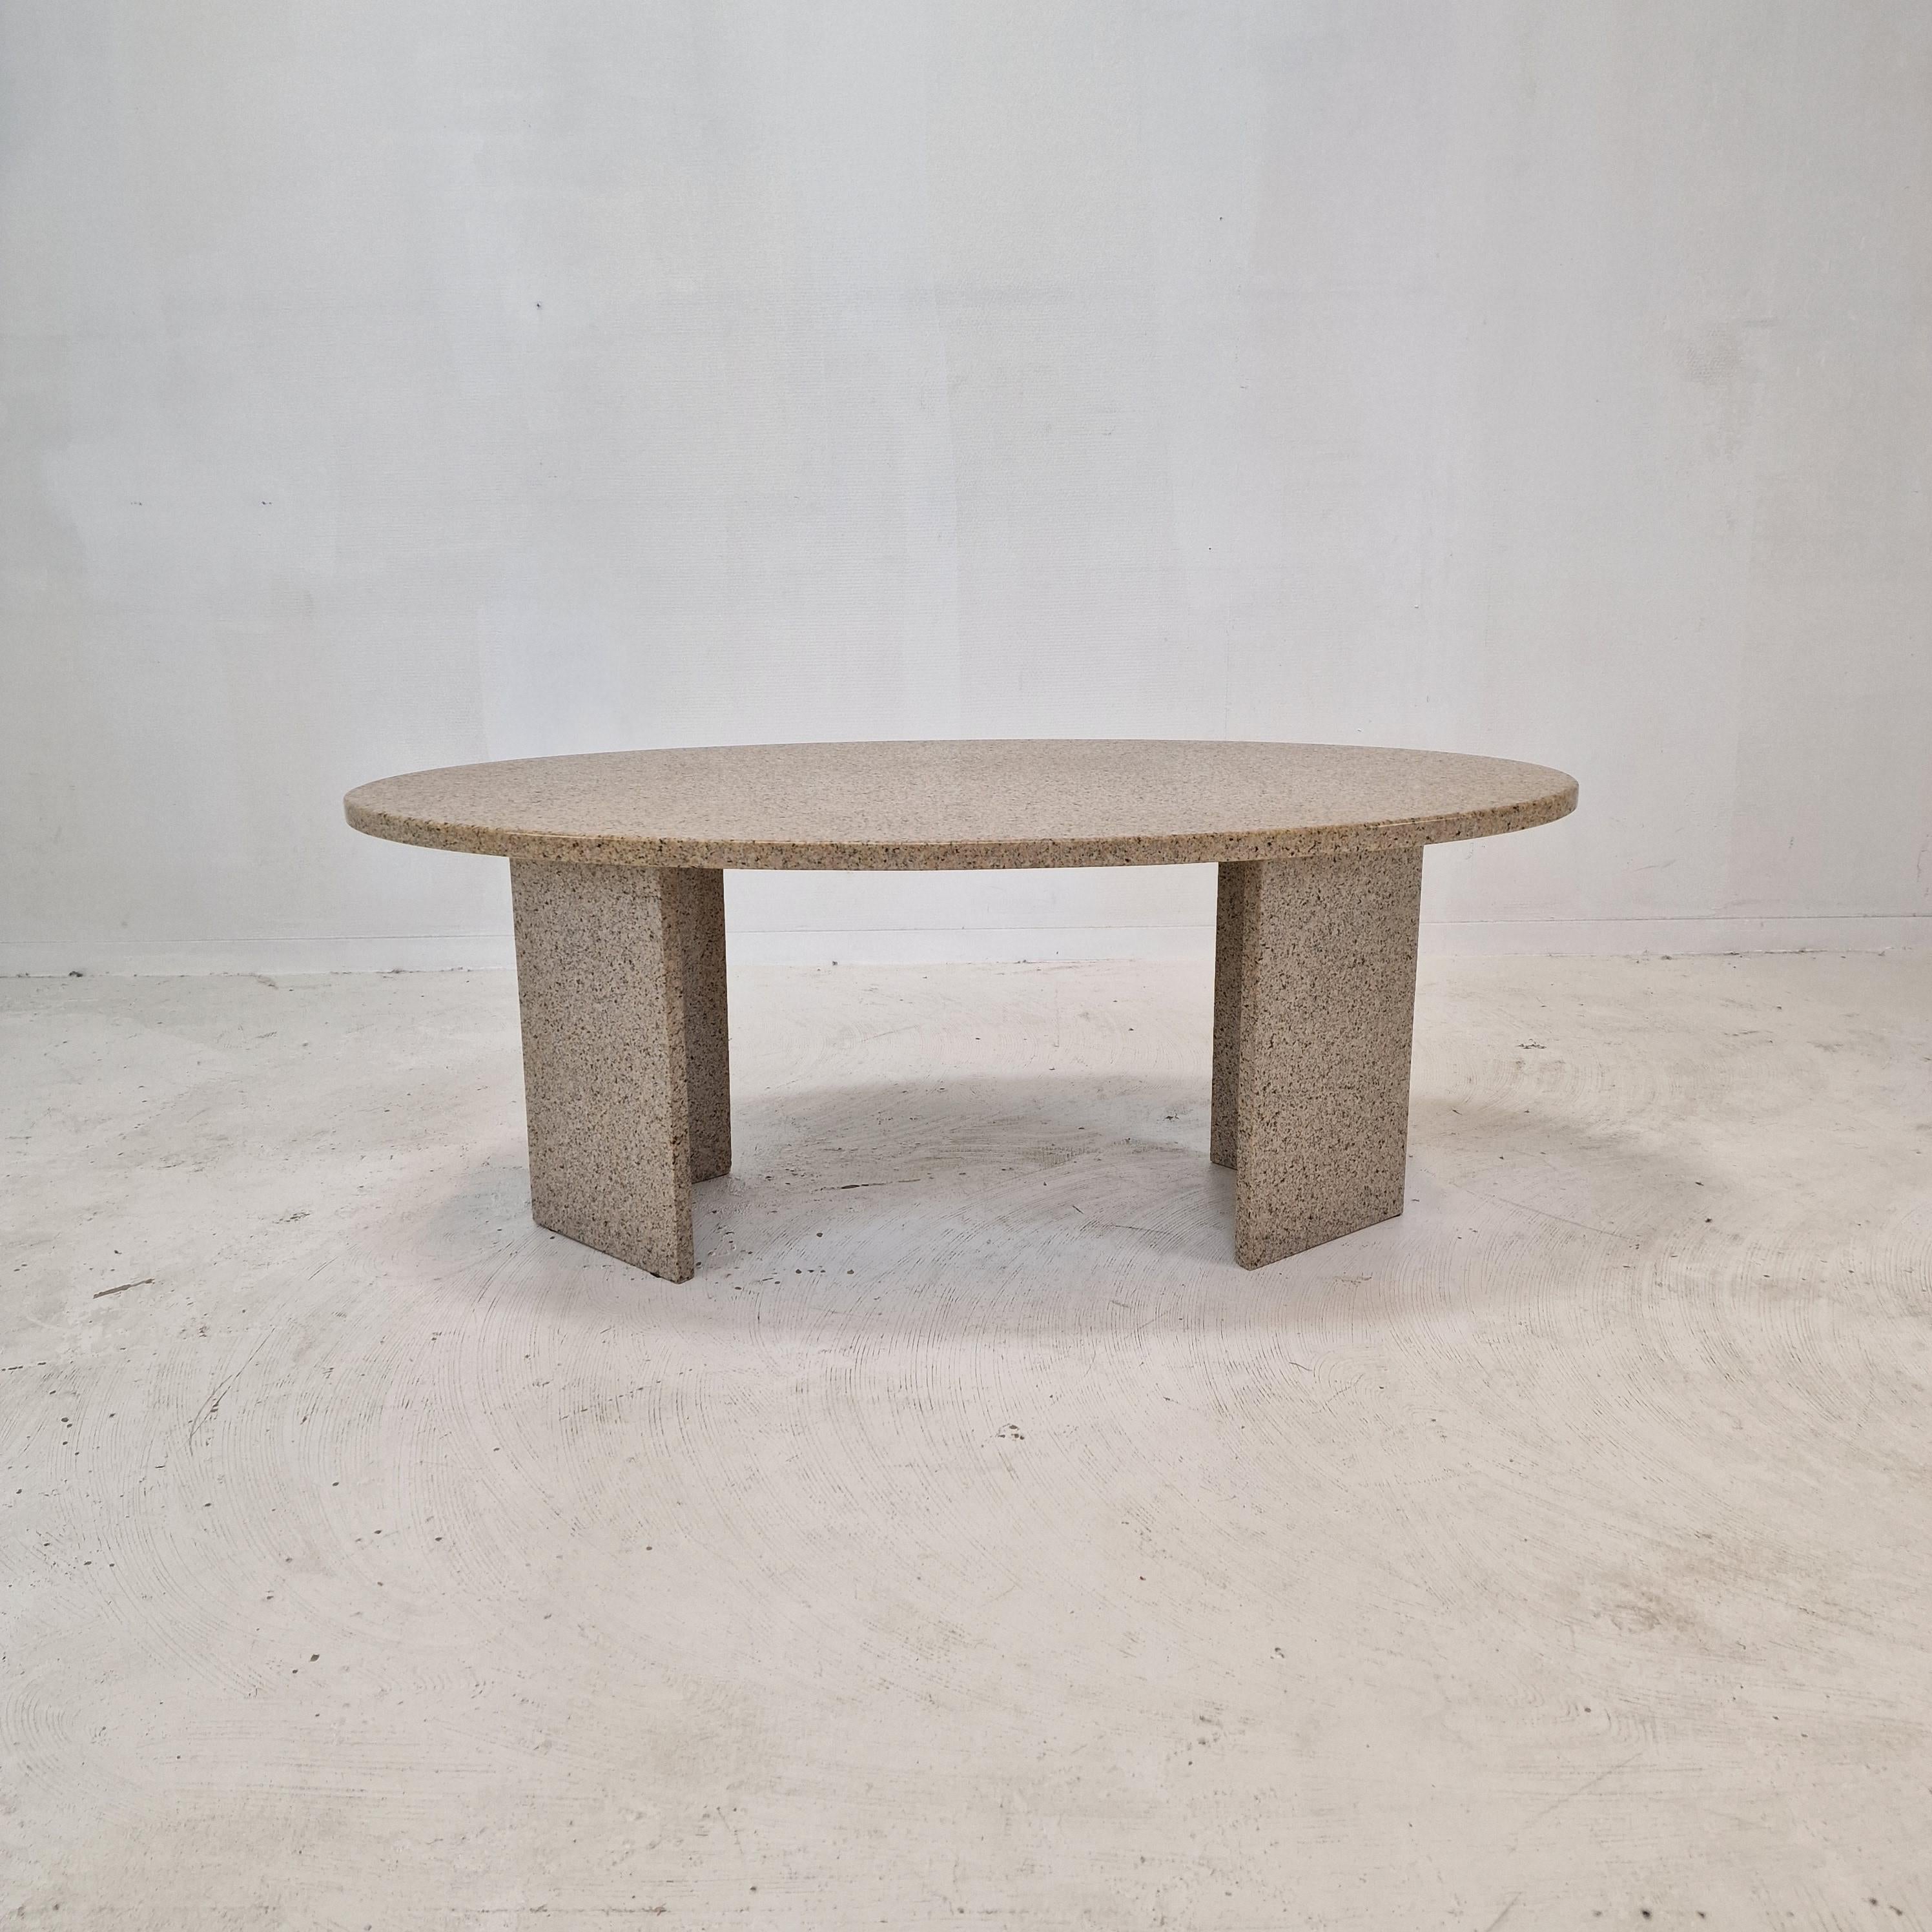 Very nice Italian coffee table handcrafted out of granite, 1980s.

This oval table is made of beautiful granite.
Please take notice of the very nice patterns.
It is possible to vary the position of the two legs.

The table is in very good